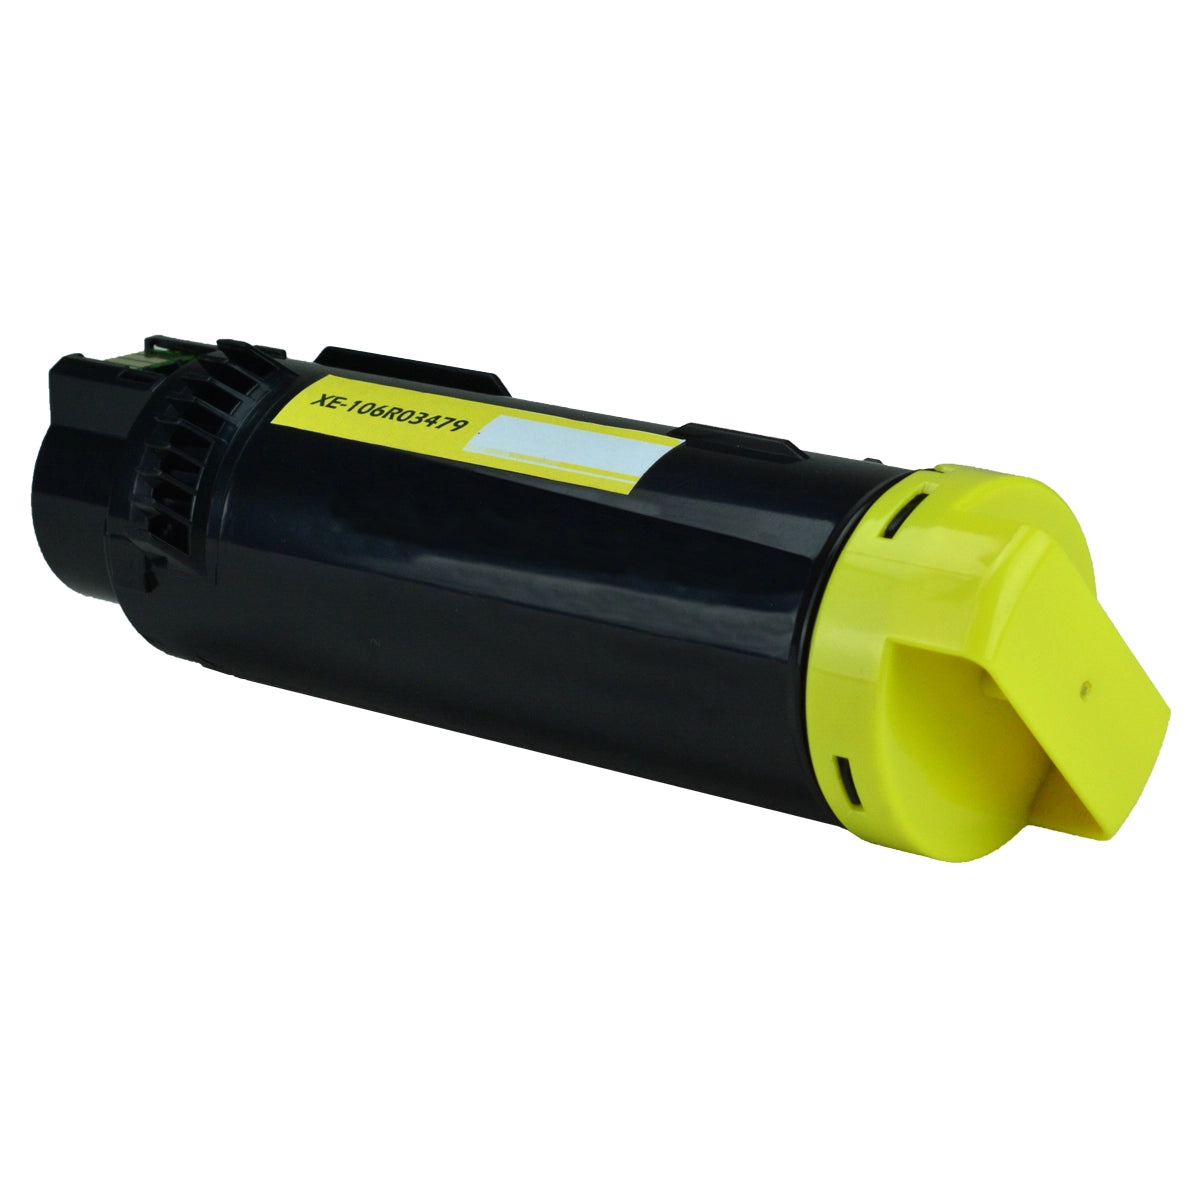 Xerox Phaser 6510/ Workcentre 6515 (106R03479) Yellow High Capacity Compatible Toner Cartridge